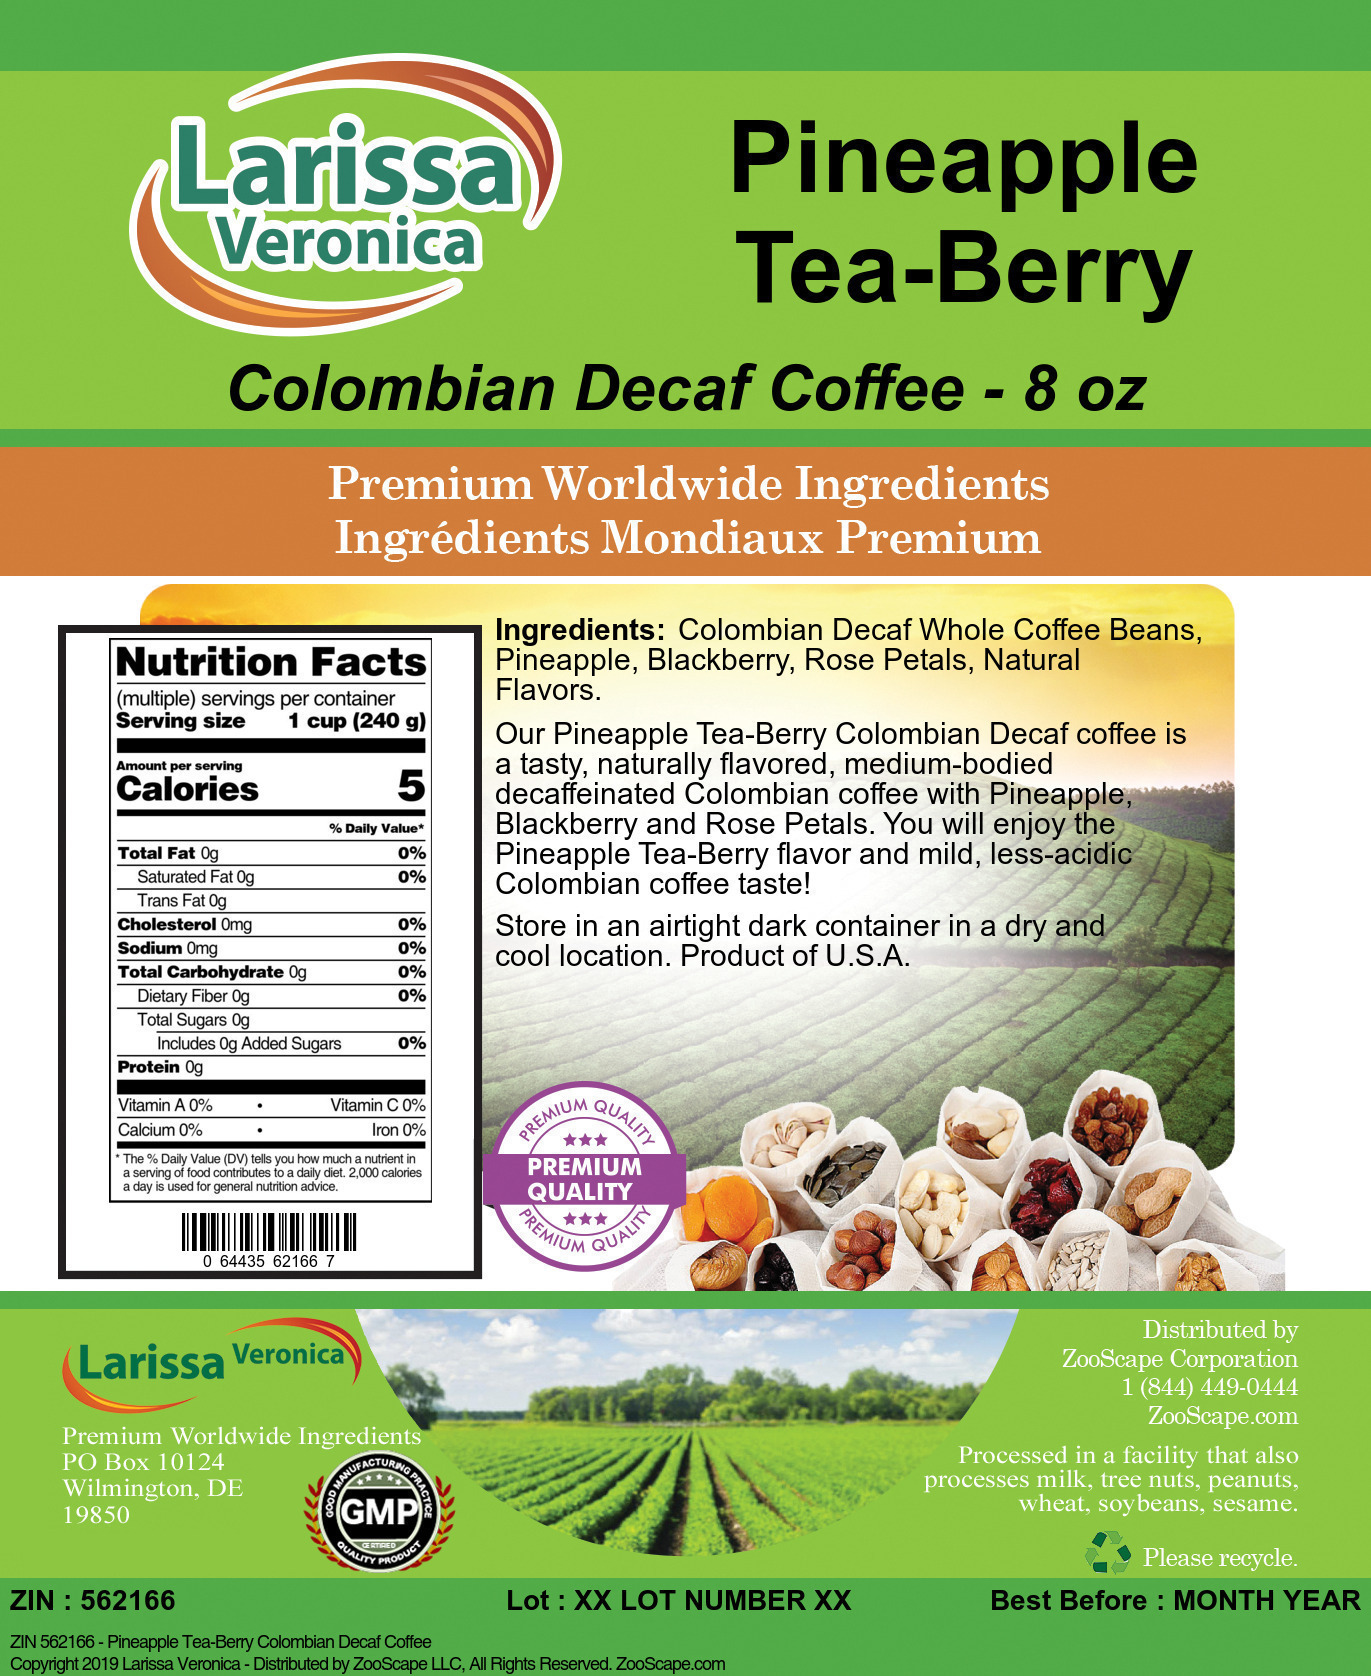 Pineapple Tea-Berry Colombian Decaf Coffee - Label